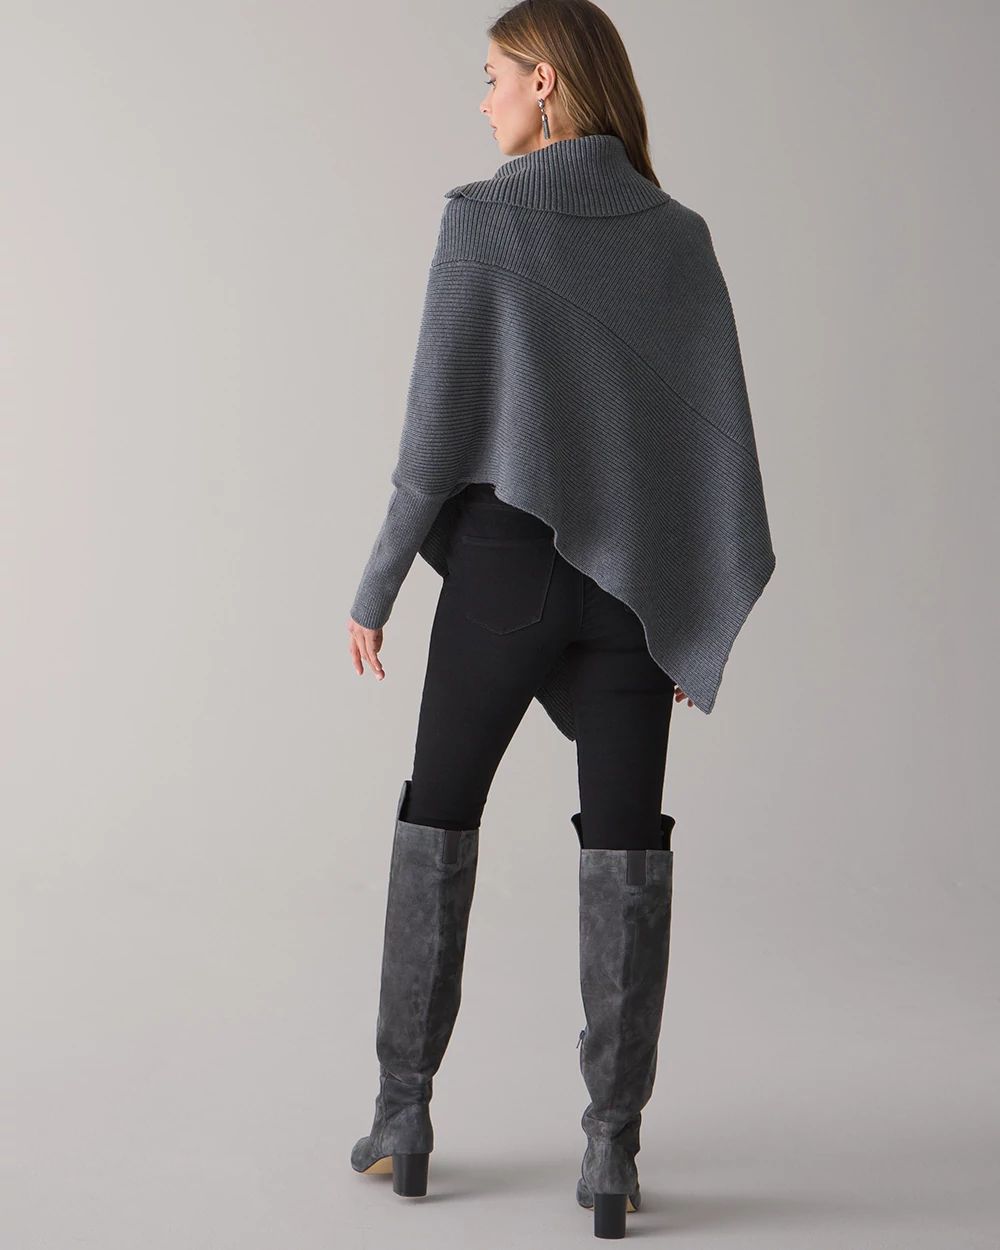 Long Sleeve Zip Neck Poncho click to view larger image.